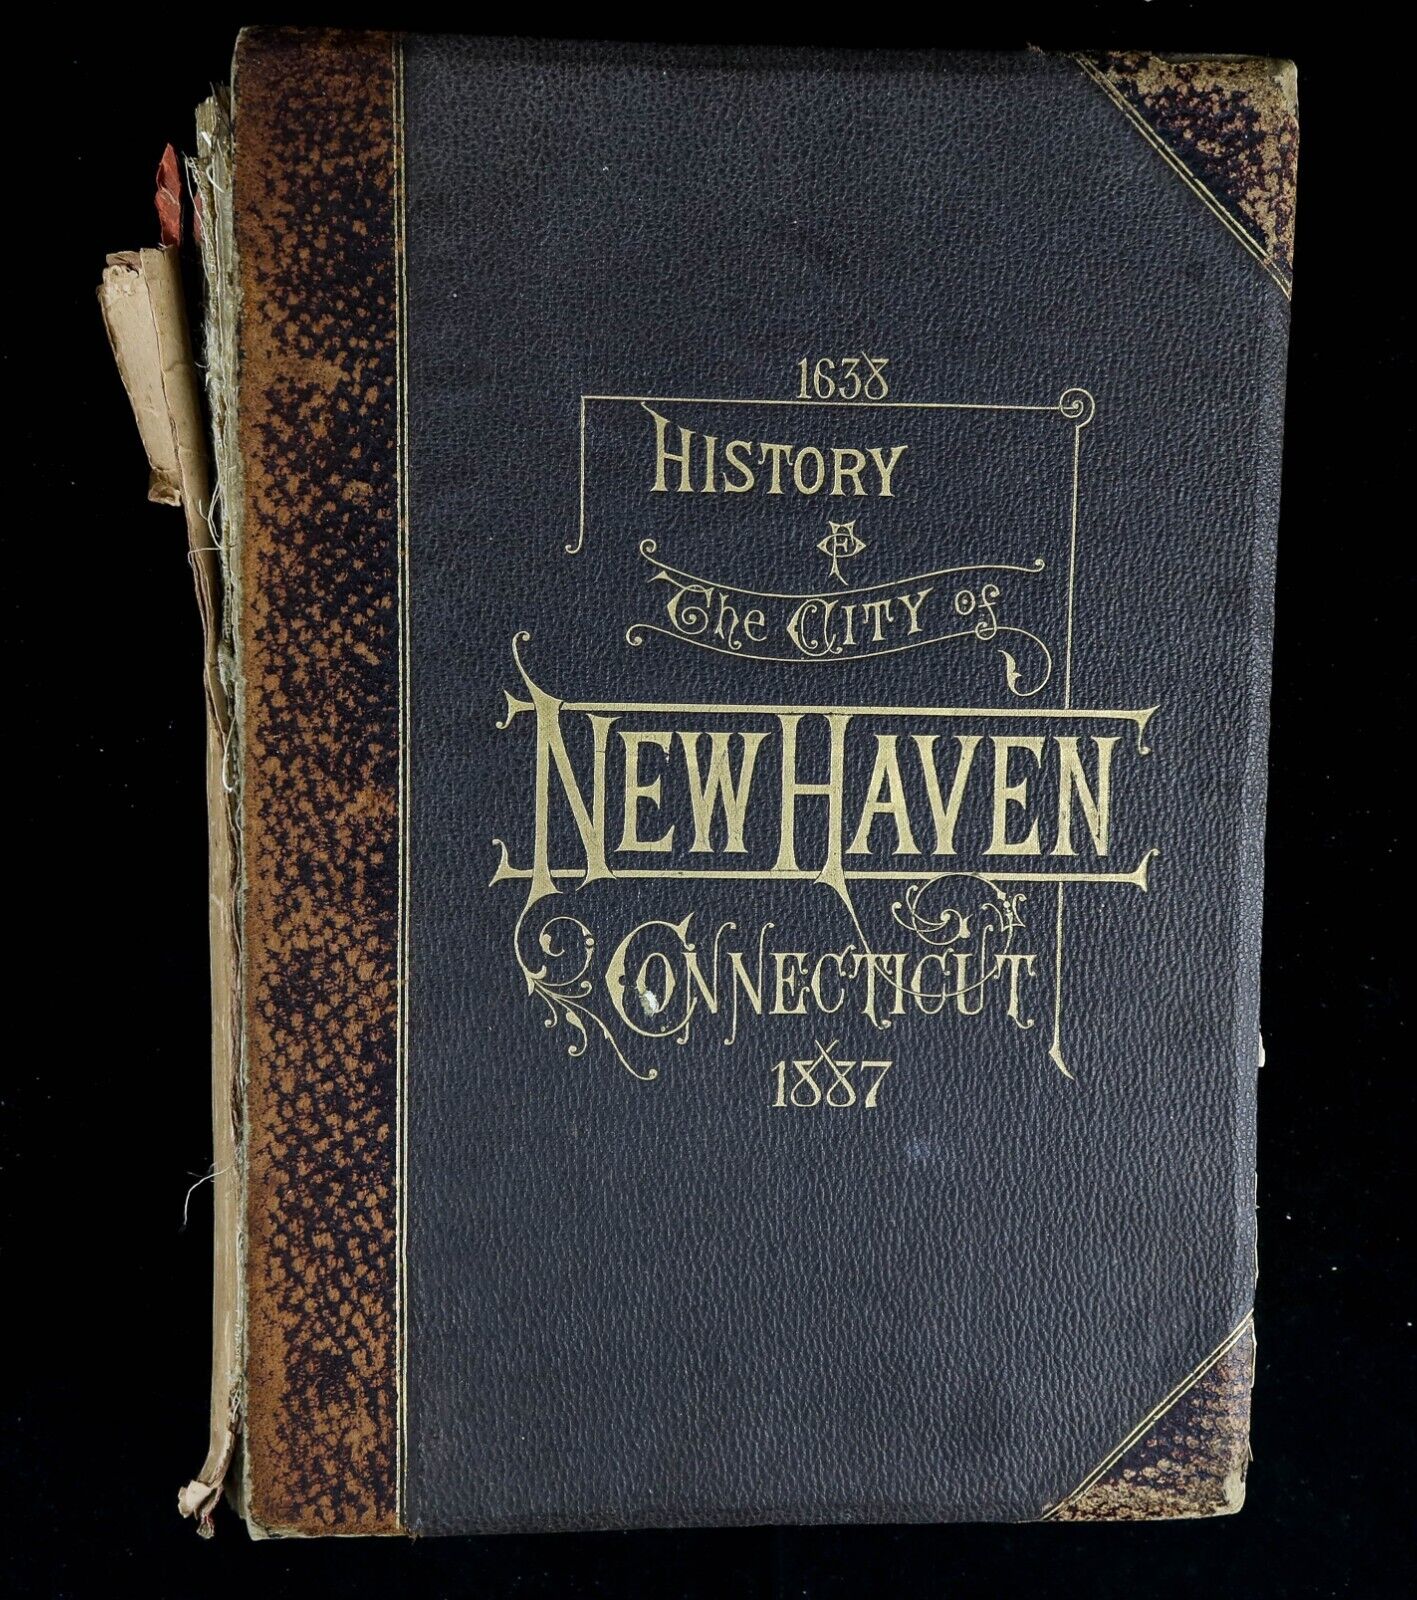 Antique Book- History of the City of New Haven to the Present Time- 1637-1887